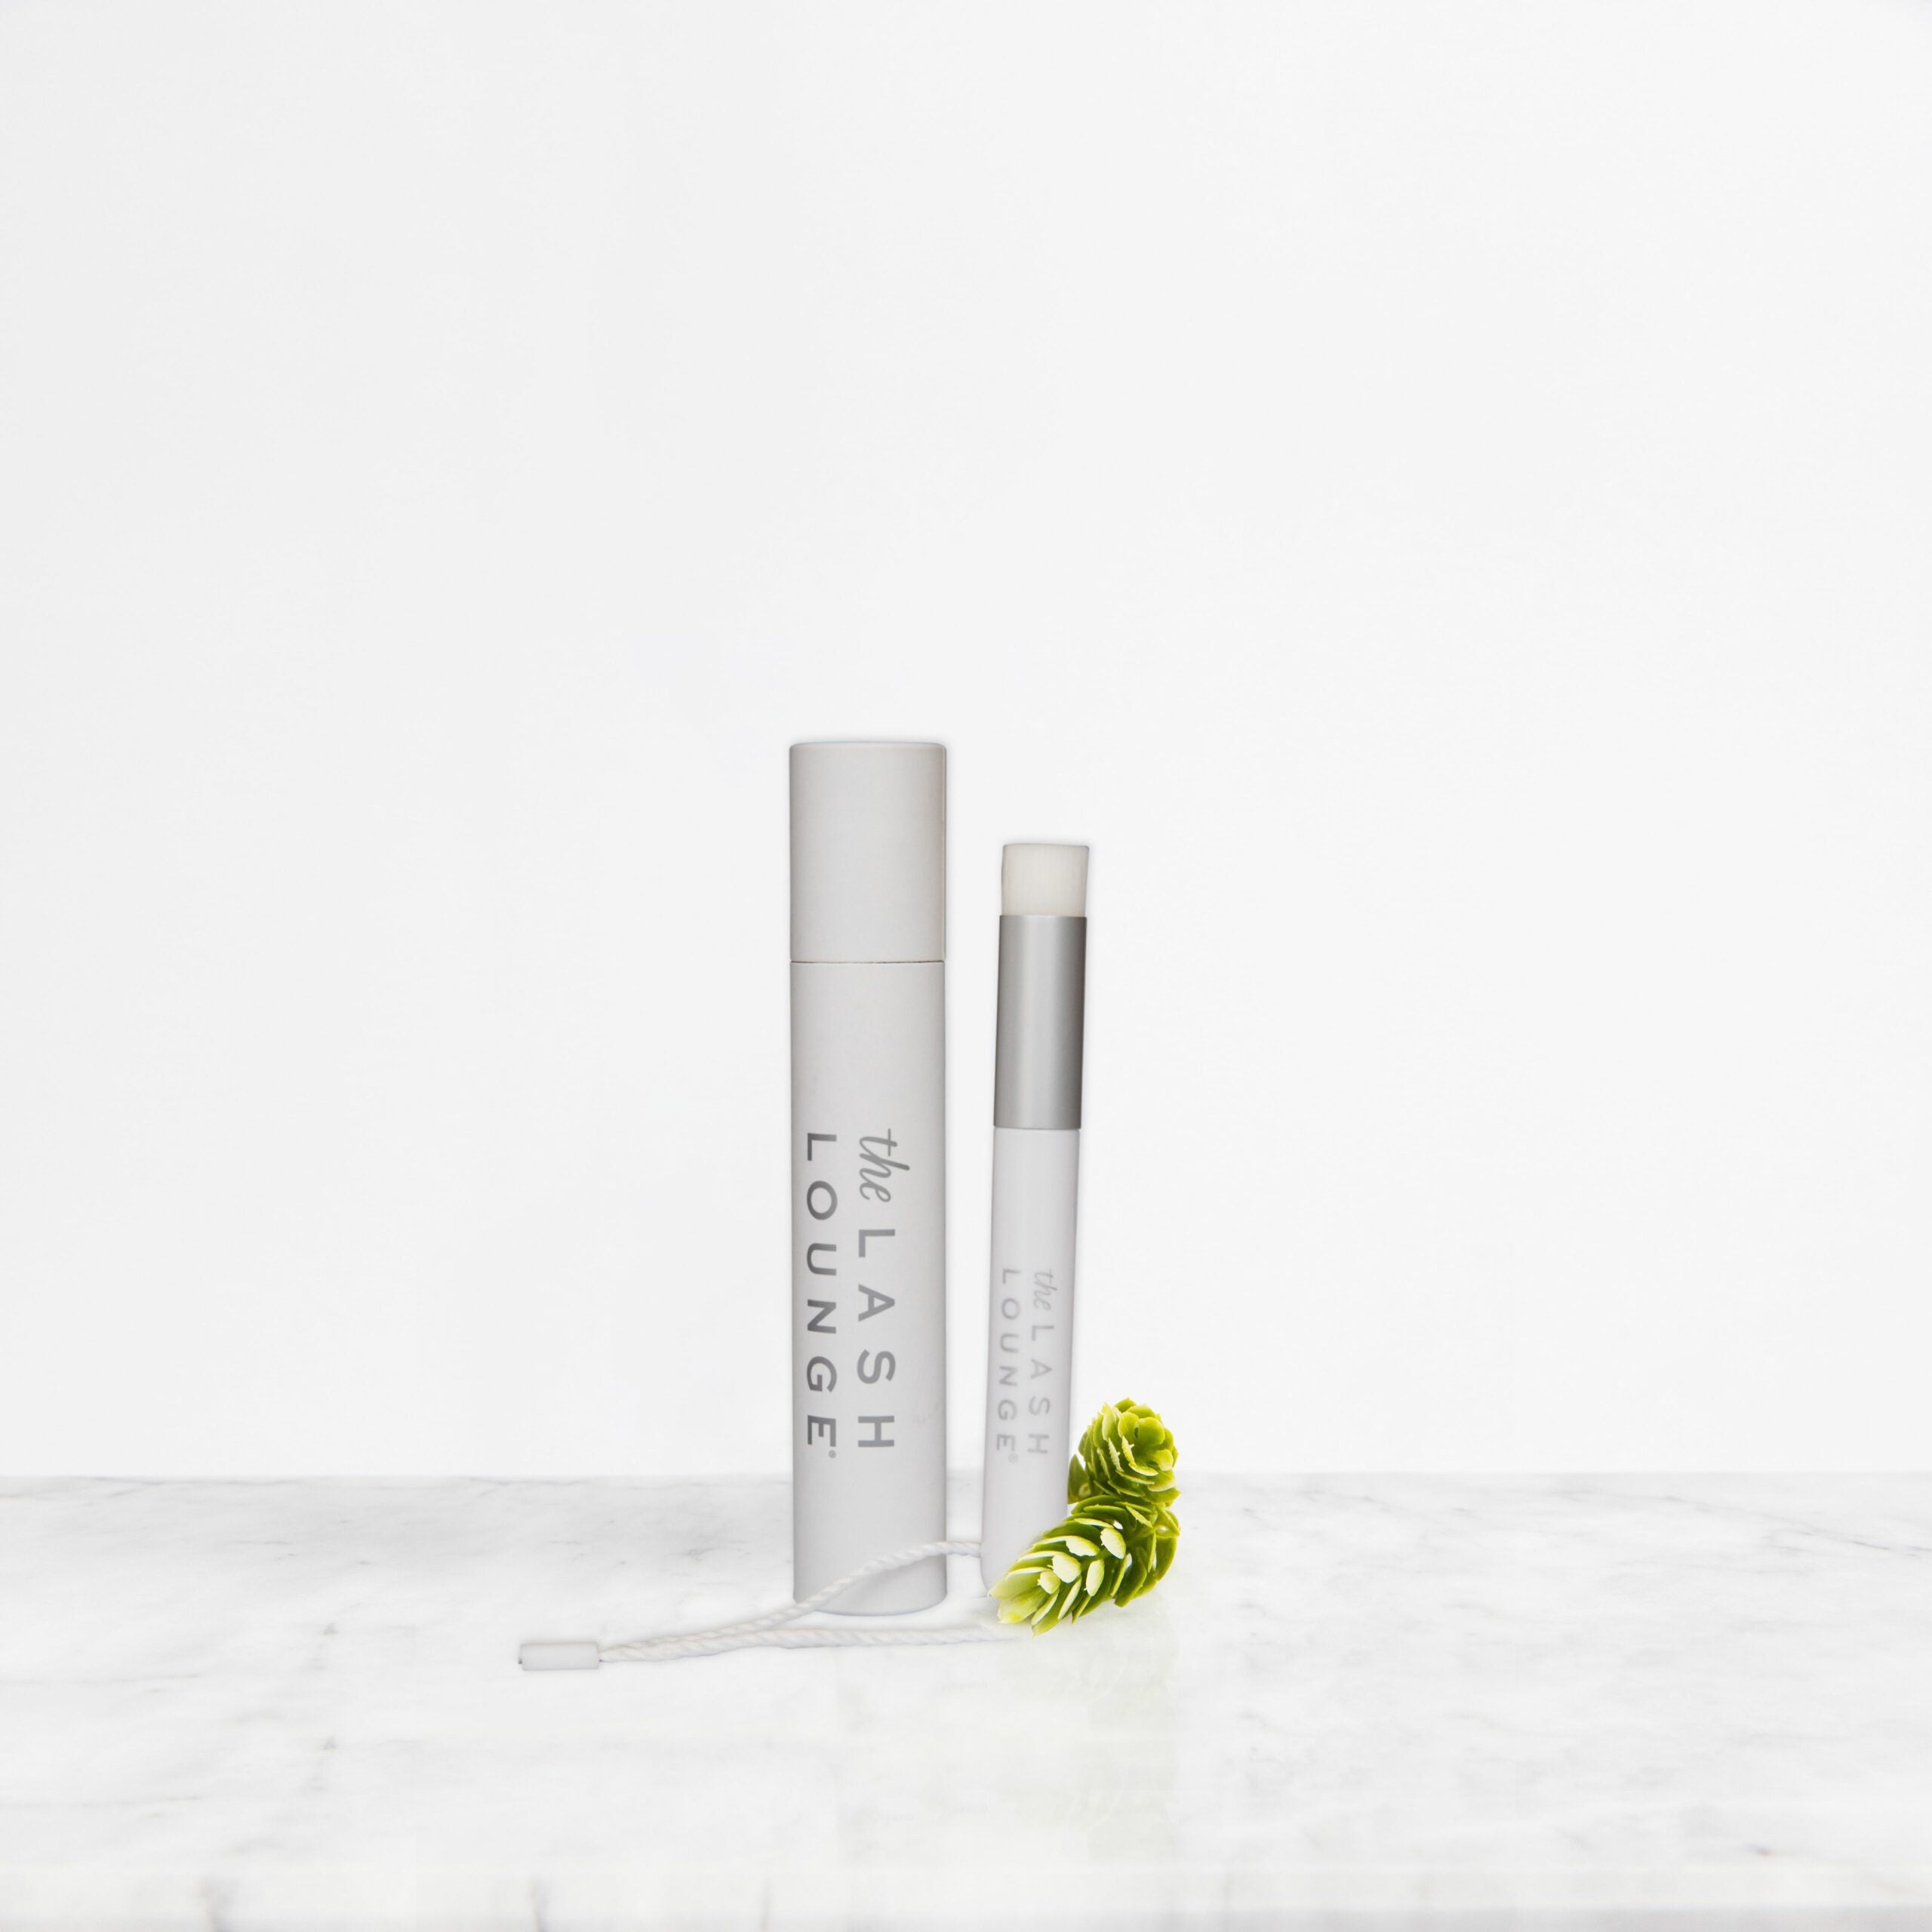 The Lash Lounge's Eyelash Cleansing Brush and Barrel laying down on a marble counter.